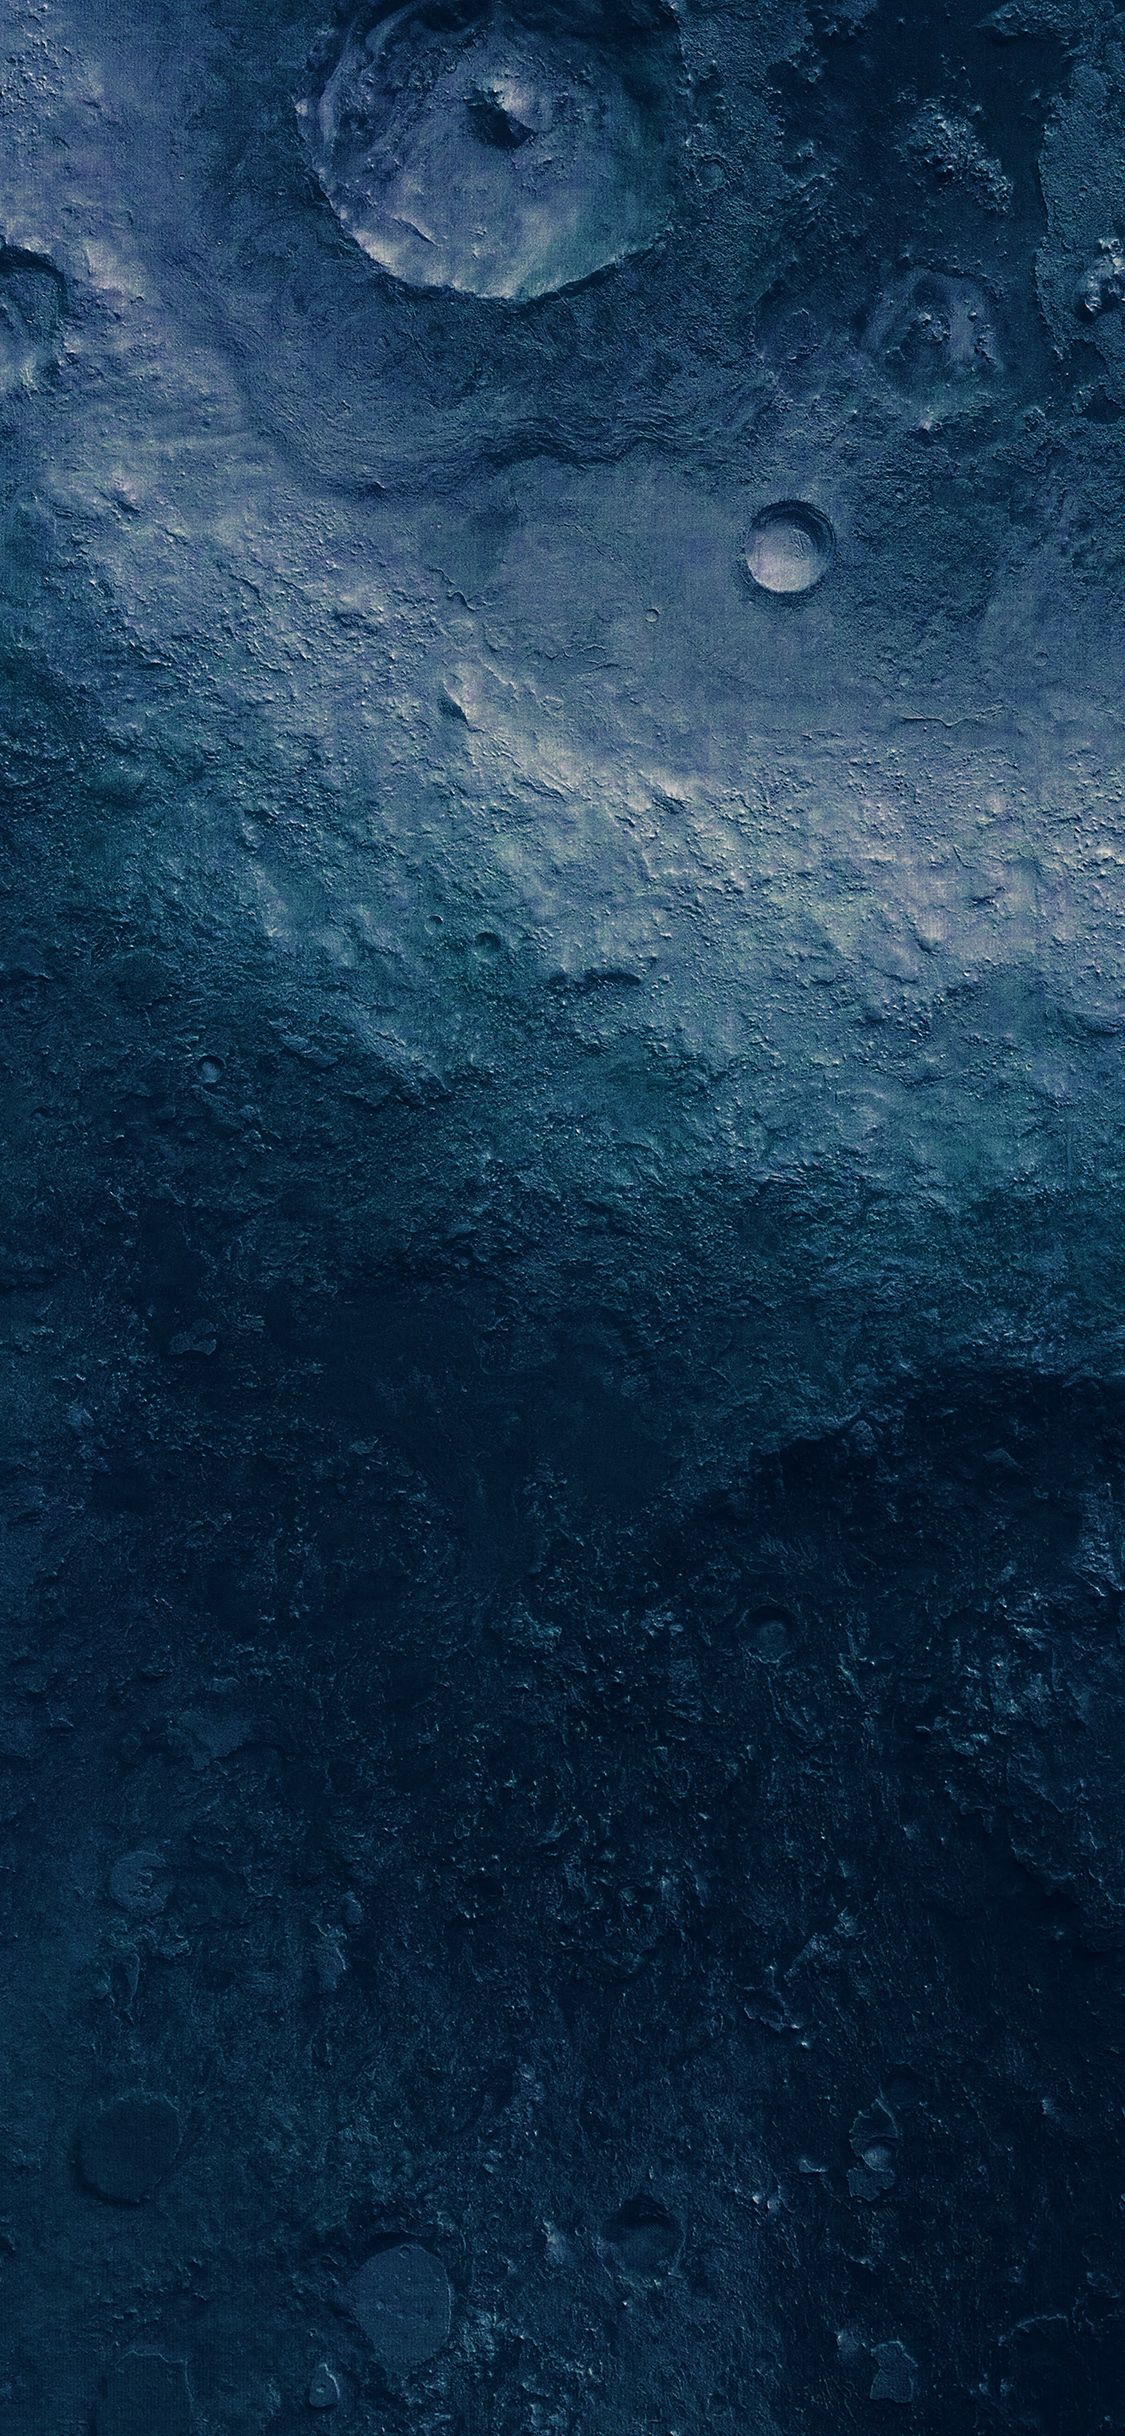 Outer earth blue space star texture iPhone X Wallpaper Free Download